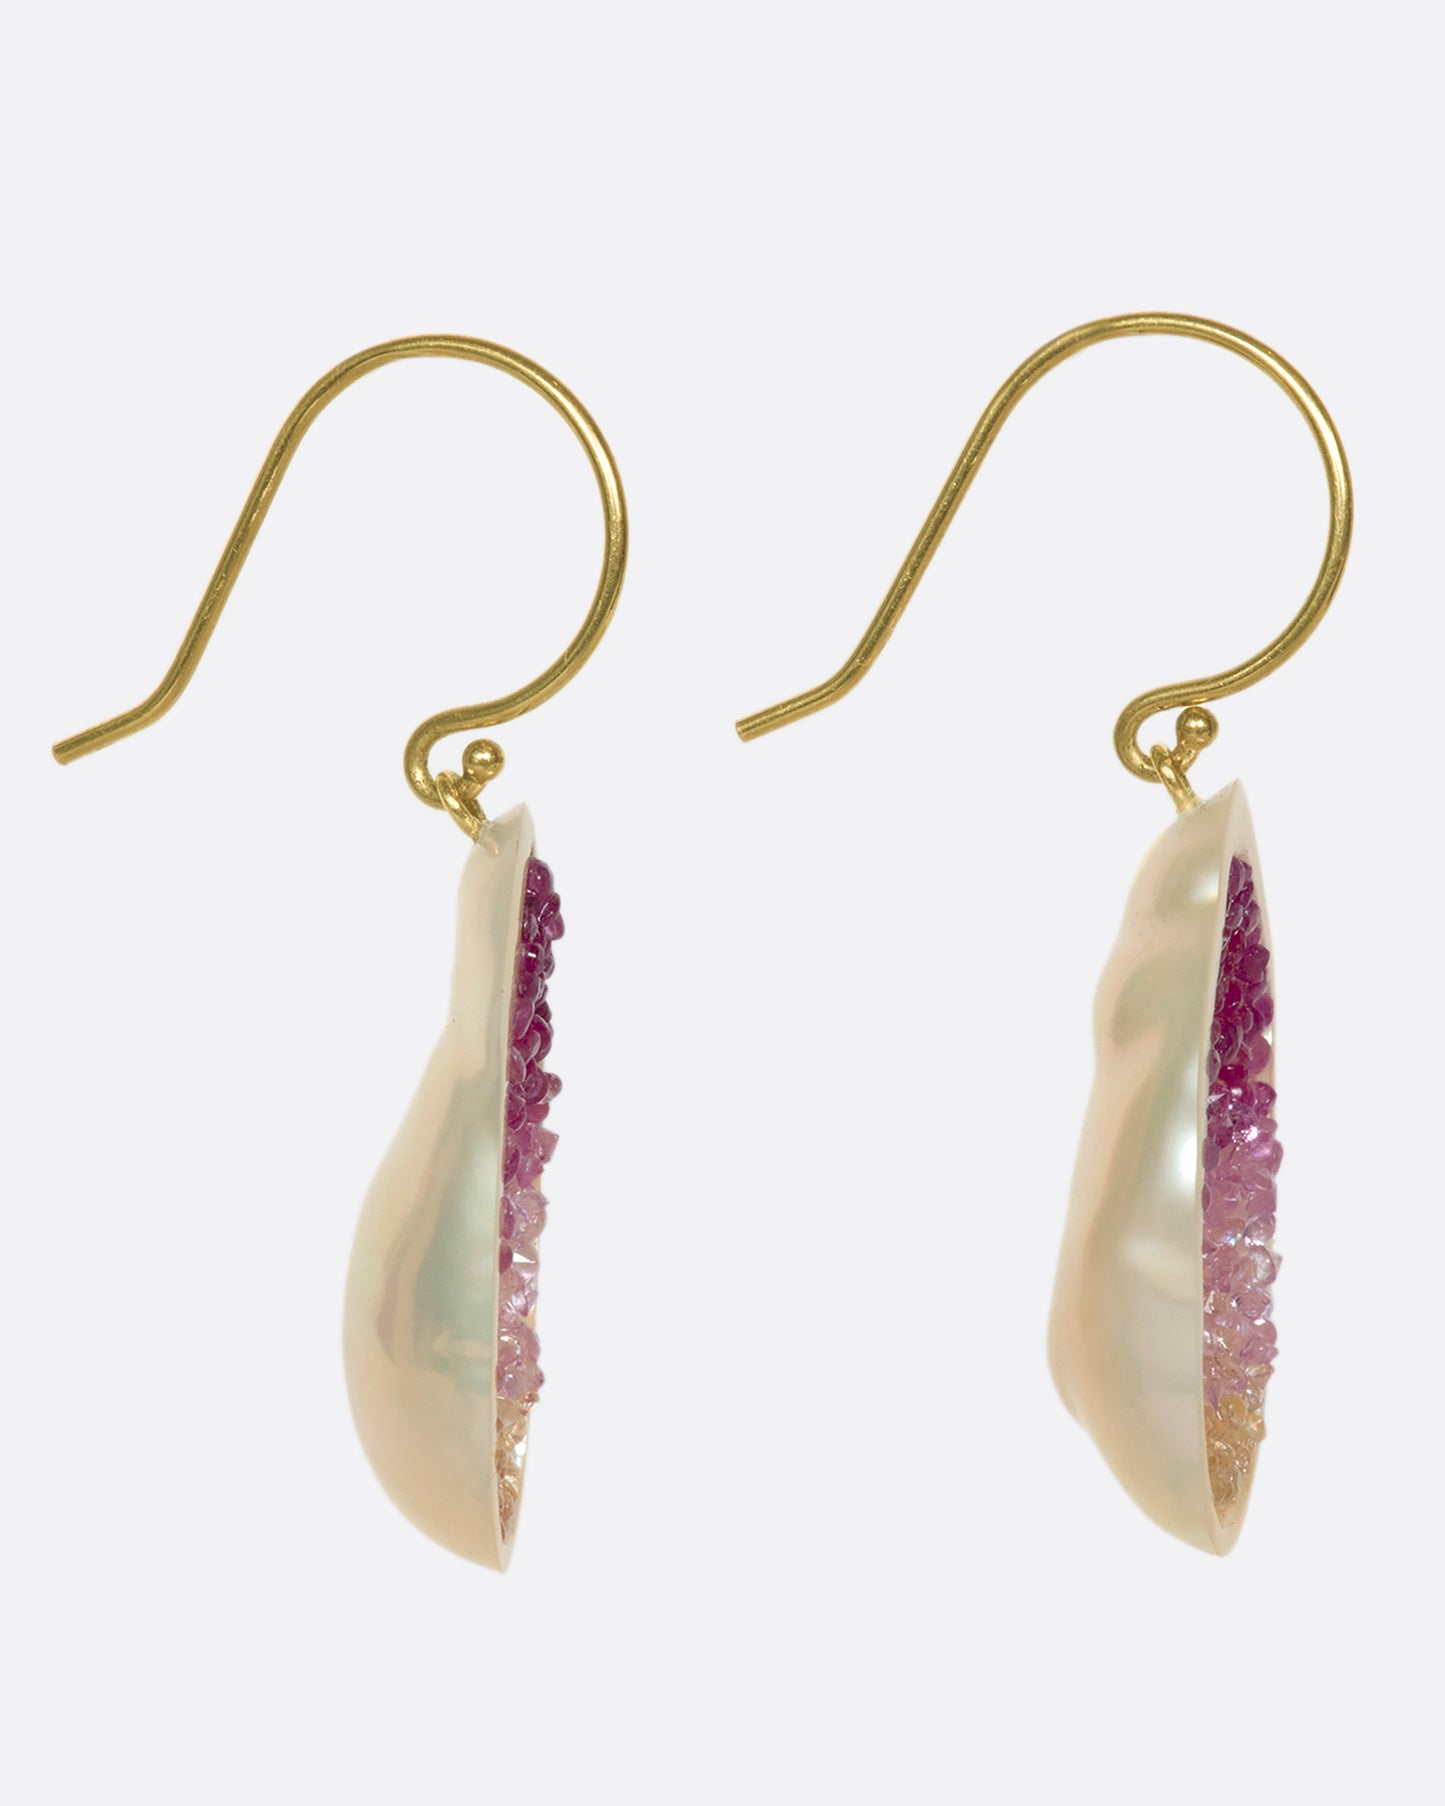 The smooth, soft pearls are lined with reclaimed pink and yellow ombre sapphires